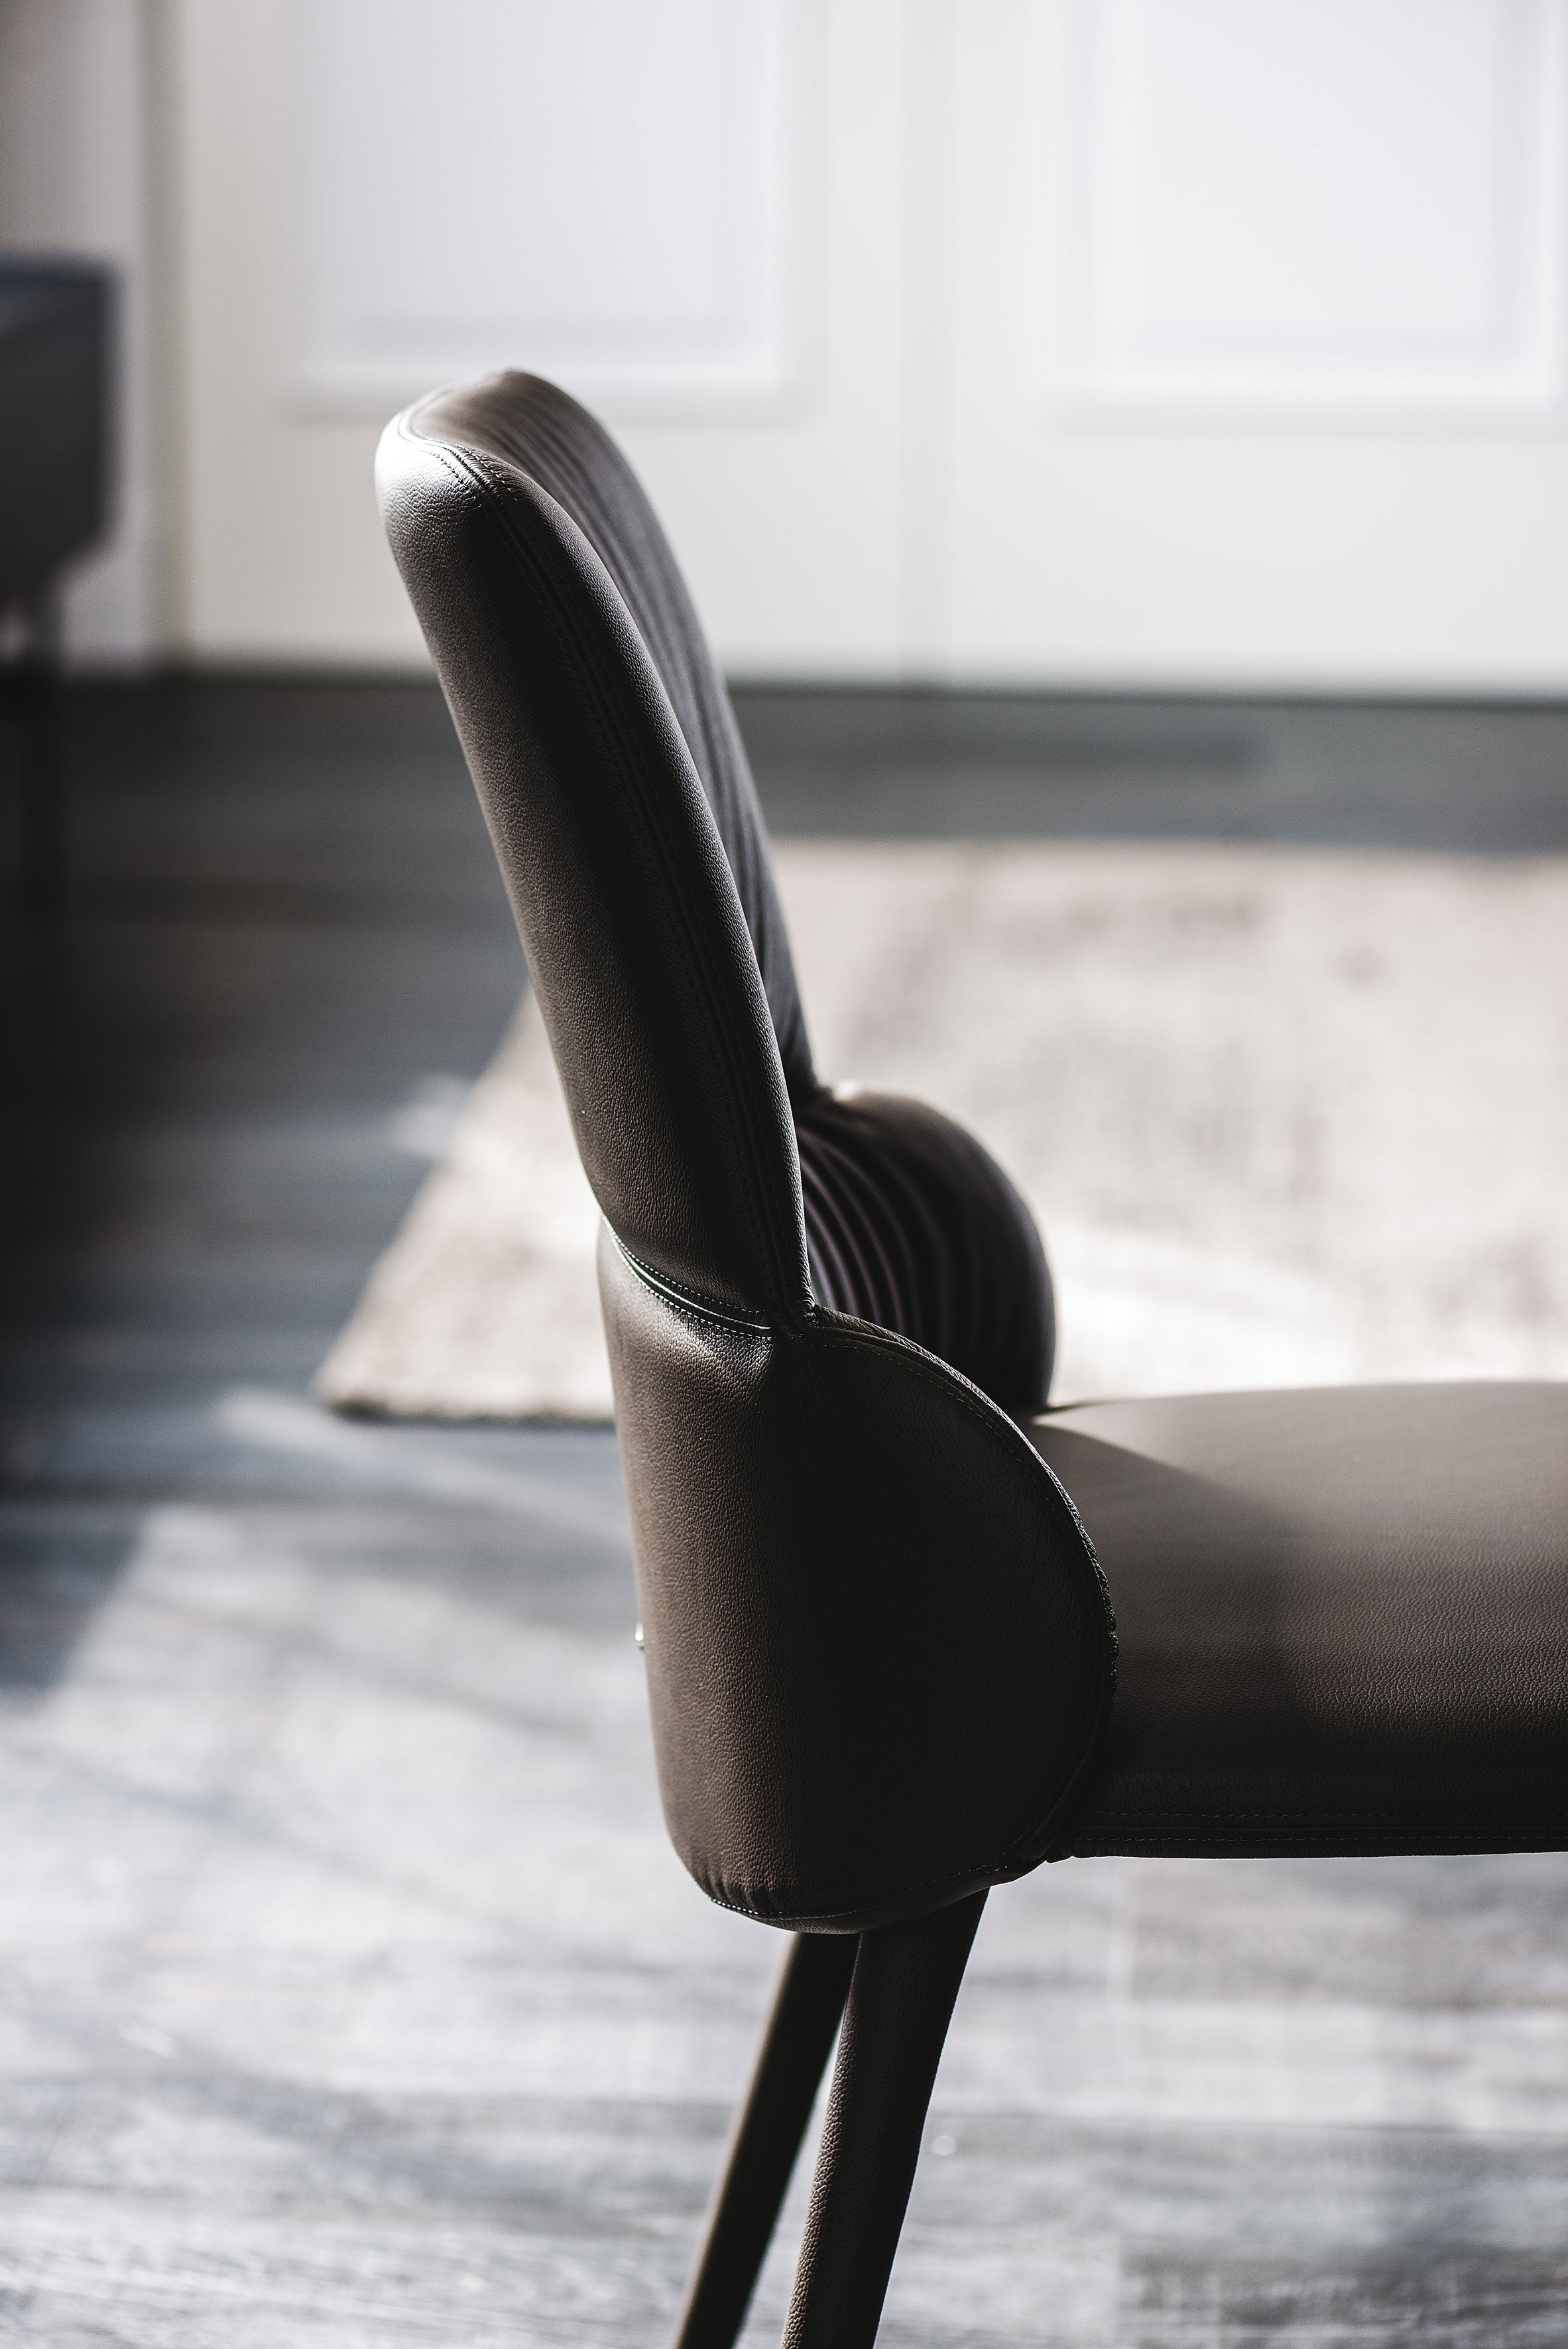 Cattelan Italia Ginger Chair With Steel Frame And Covered In Fabric